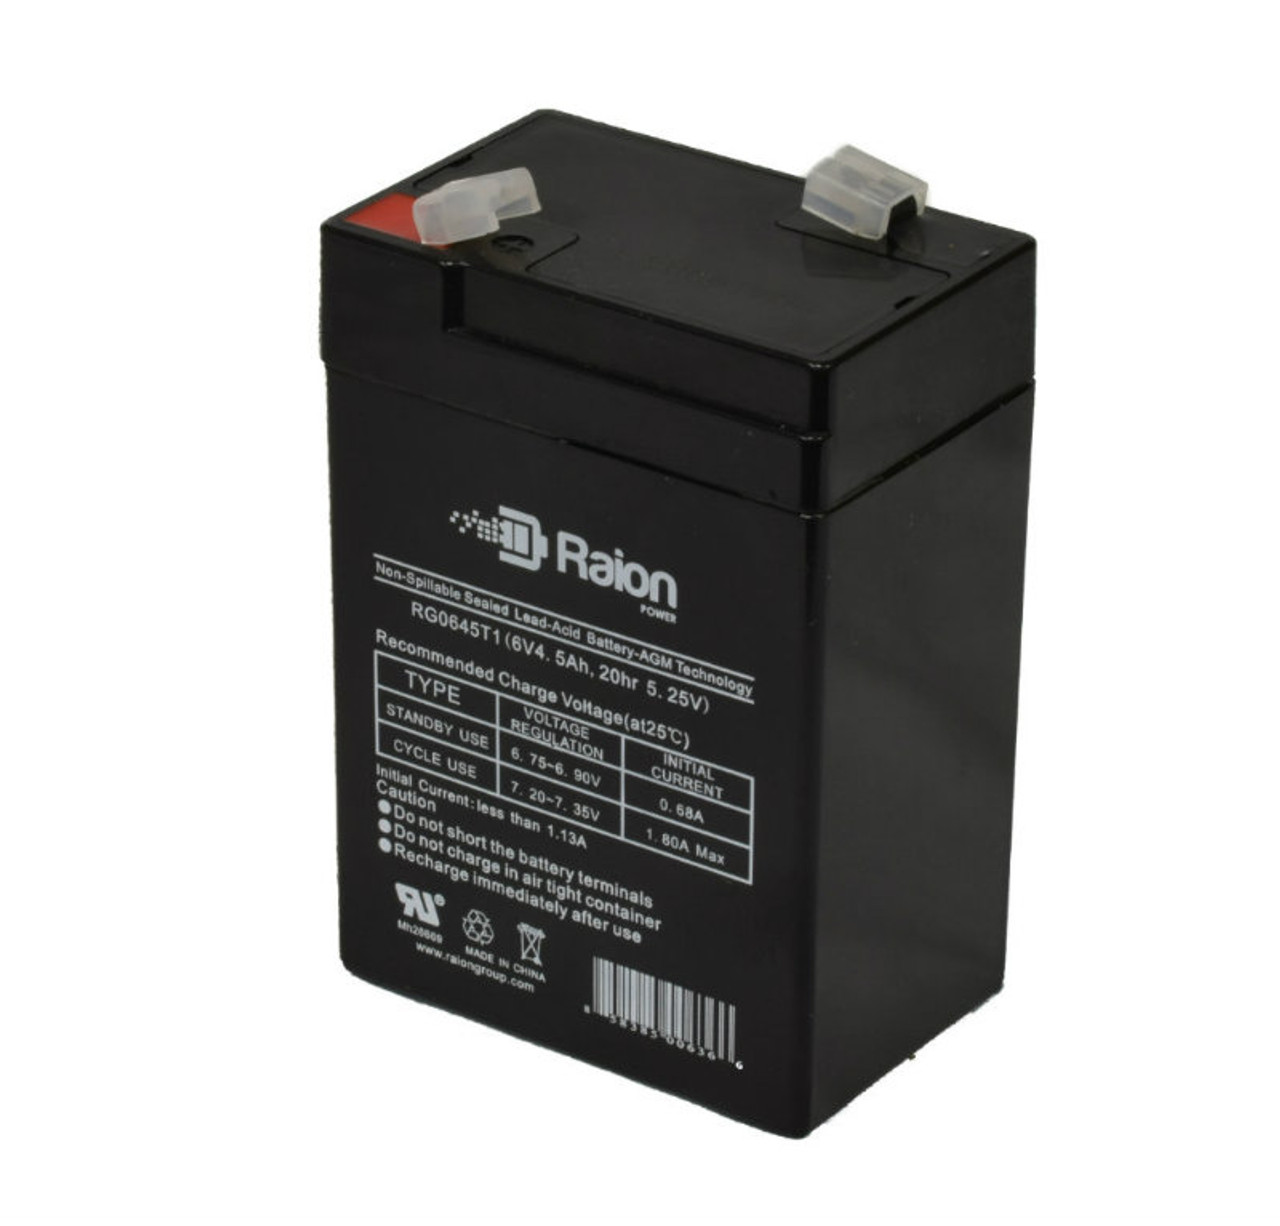 Raion Power RG0645T1 6V 4.5Ah Replacement Battery Cartridge for Mcgaw 521 Plus